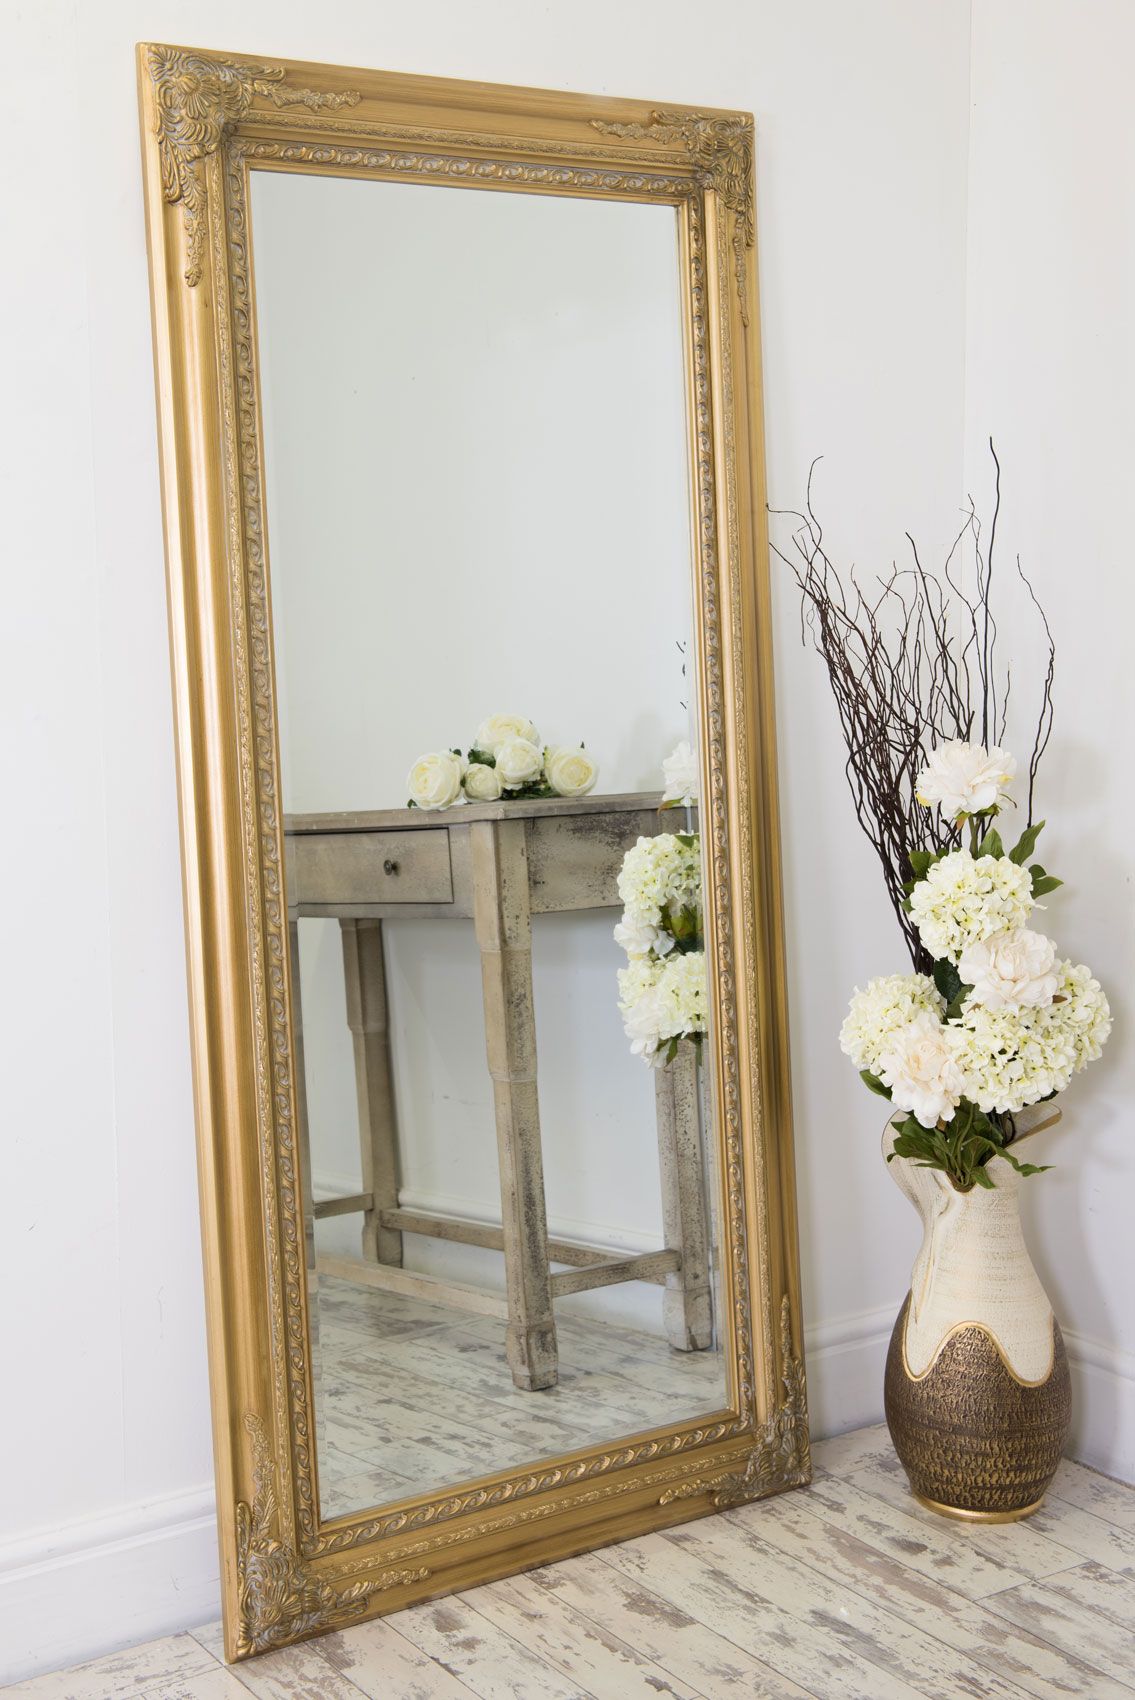 Extra Large Gold Antique Style Wall Mirror Wood 5Ft10 X 2Ft10 178Cm X Throughout Oversized Wall Mirrors (View 6 of 15)